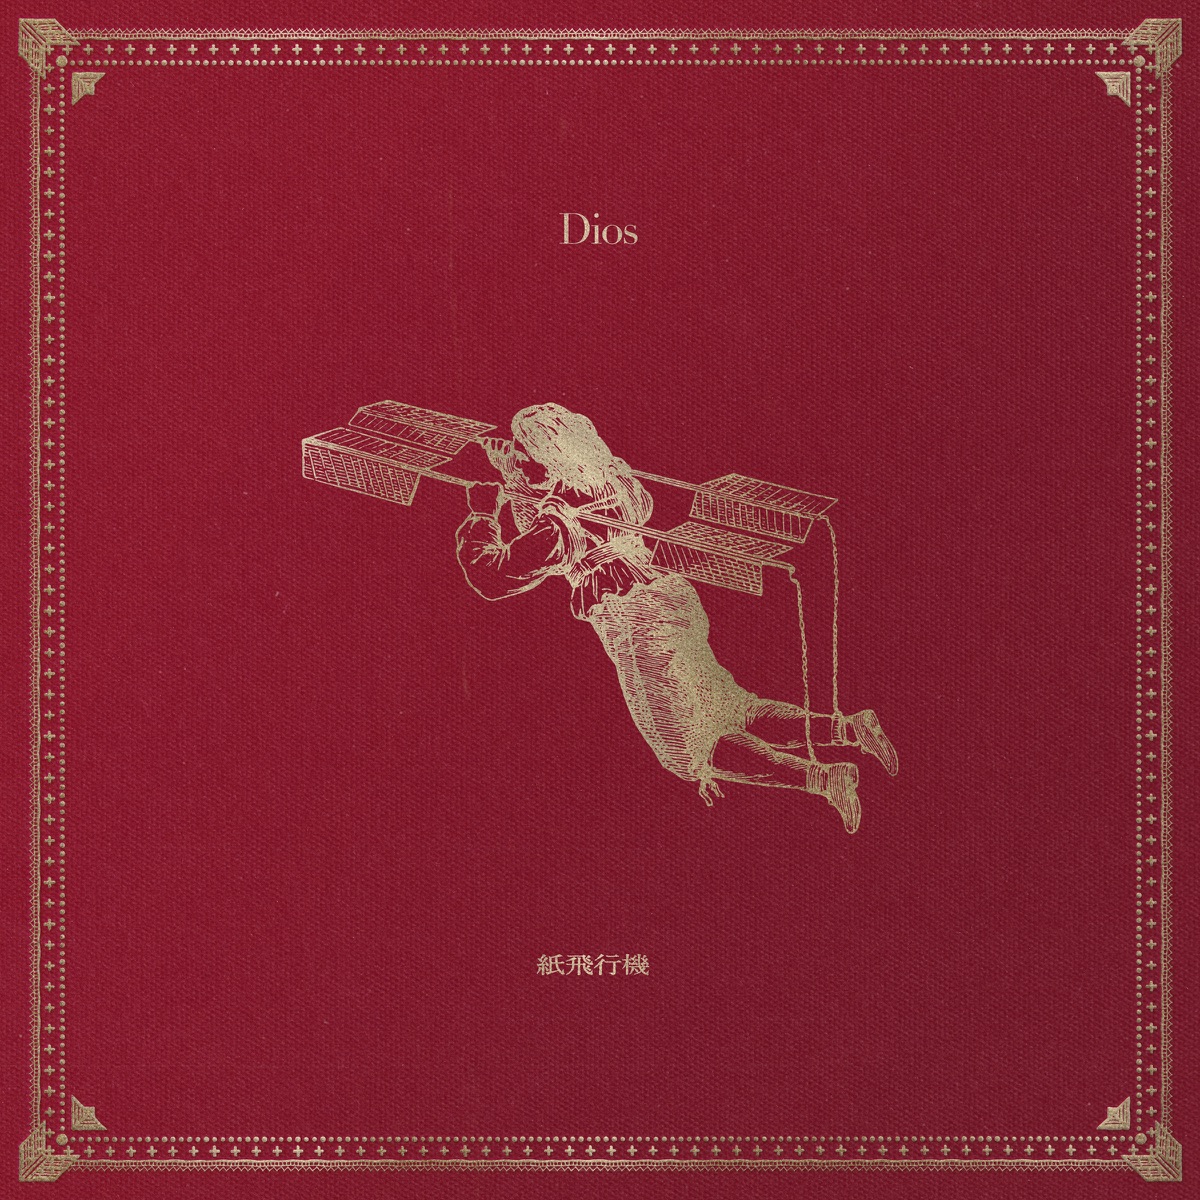 Cover art for『Dios - 紙飛行機』from the release『Paper Plane